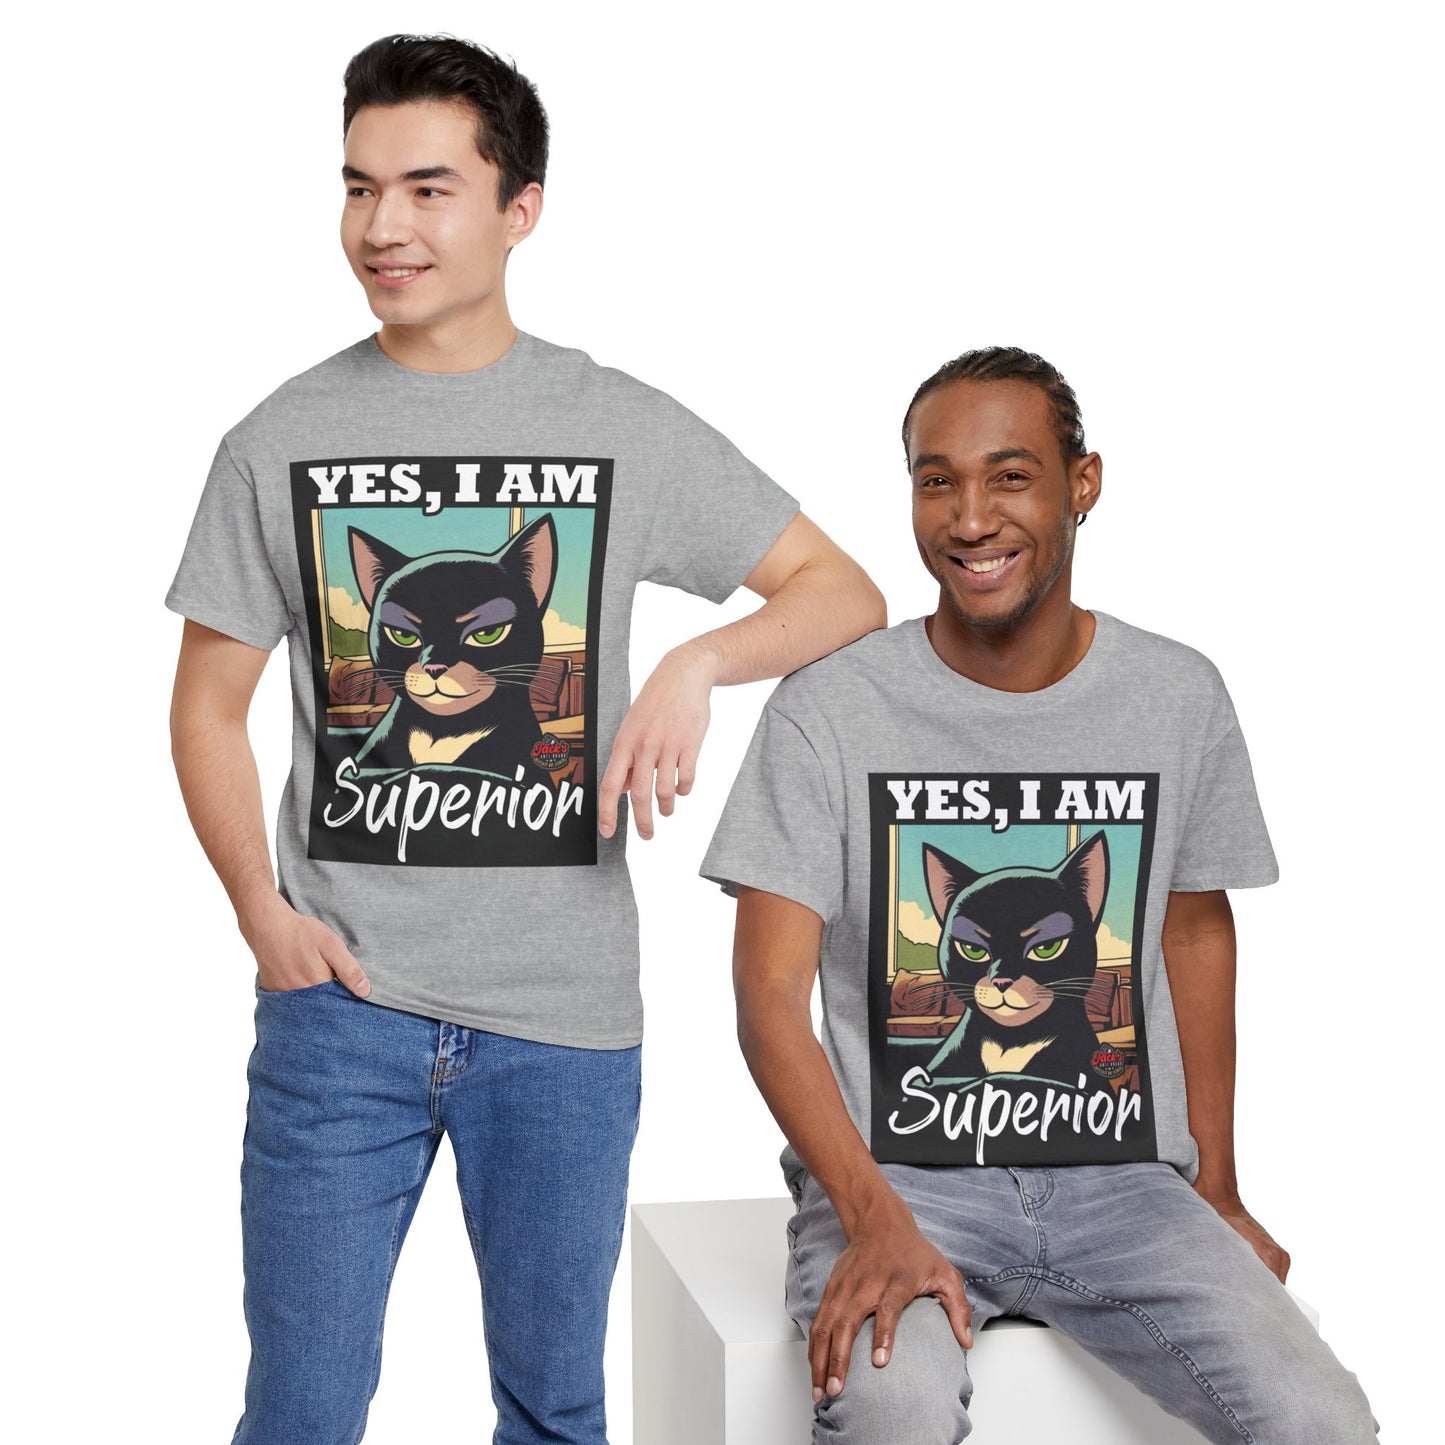 The Be You T-Shirt: Yes , I am superior